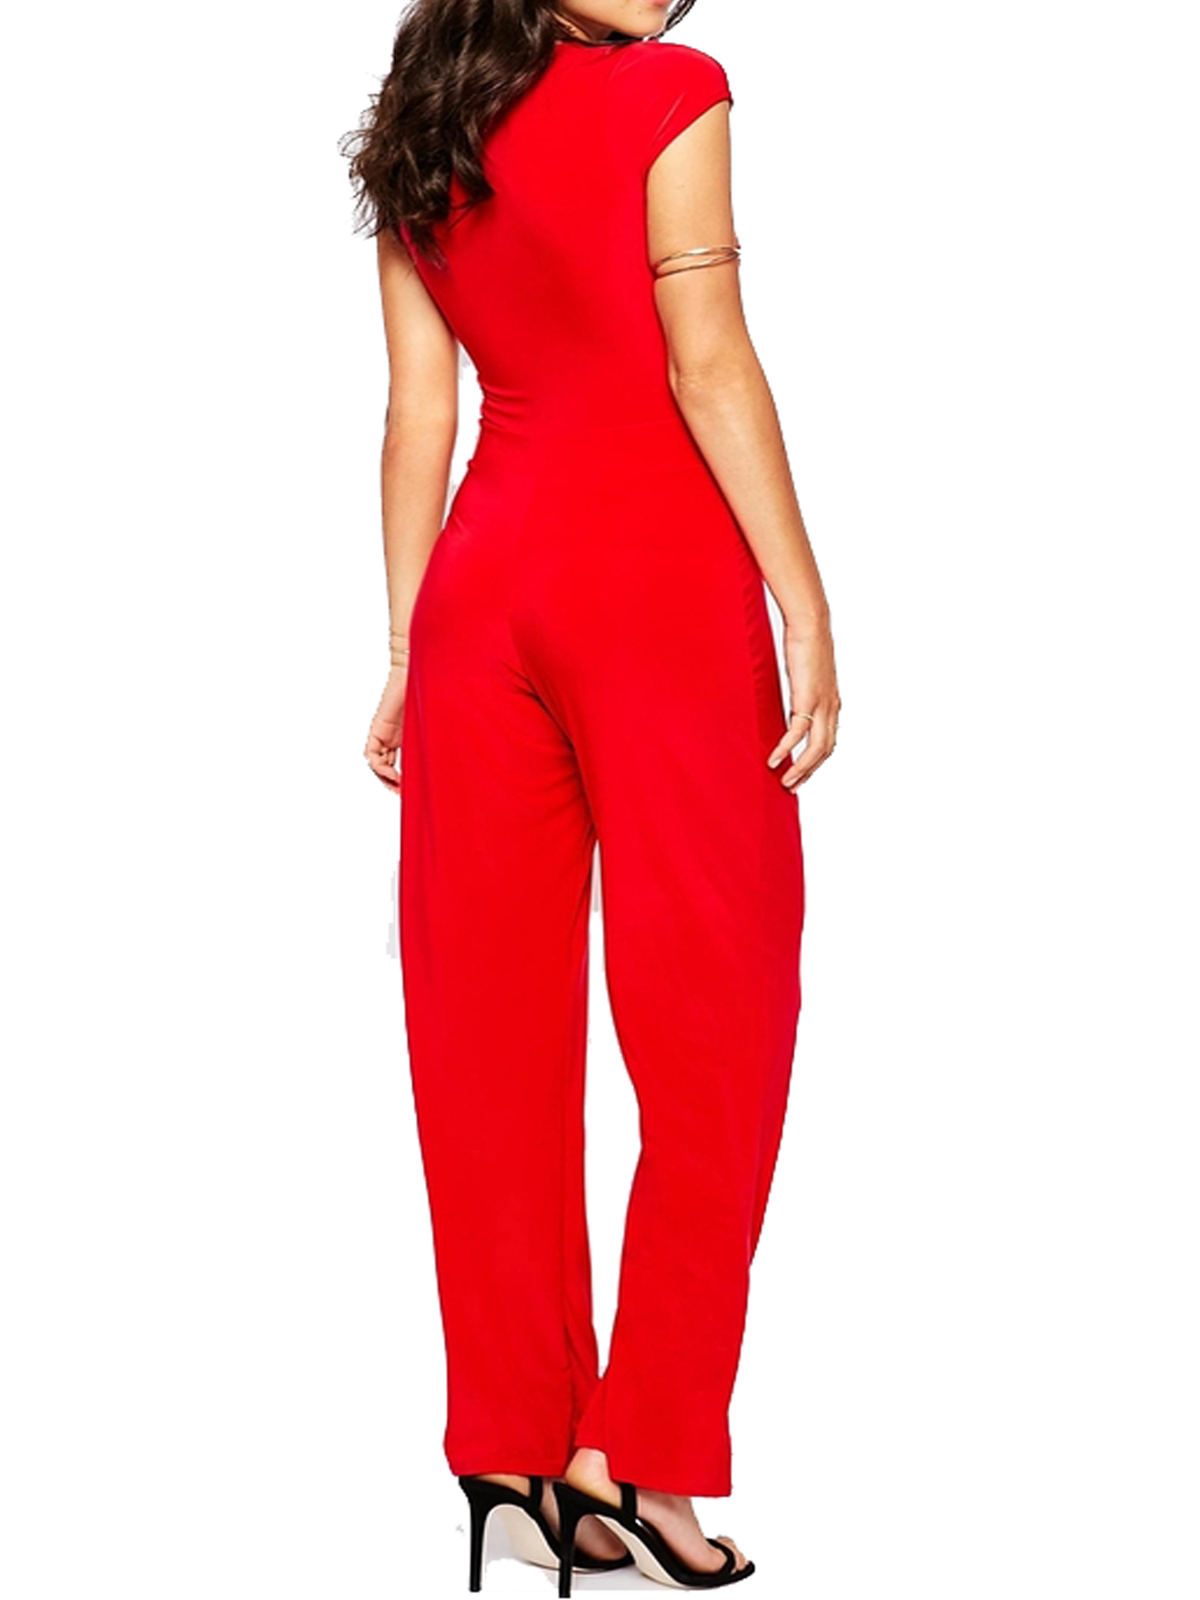 BOOHOO - - B00H00 RED Keyhole Front Jersey Jumpsuit - Size 8 to 16